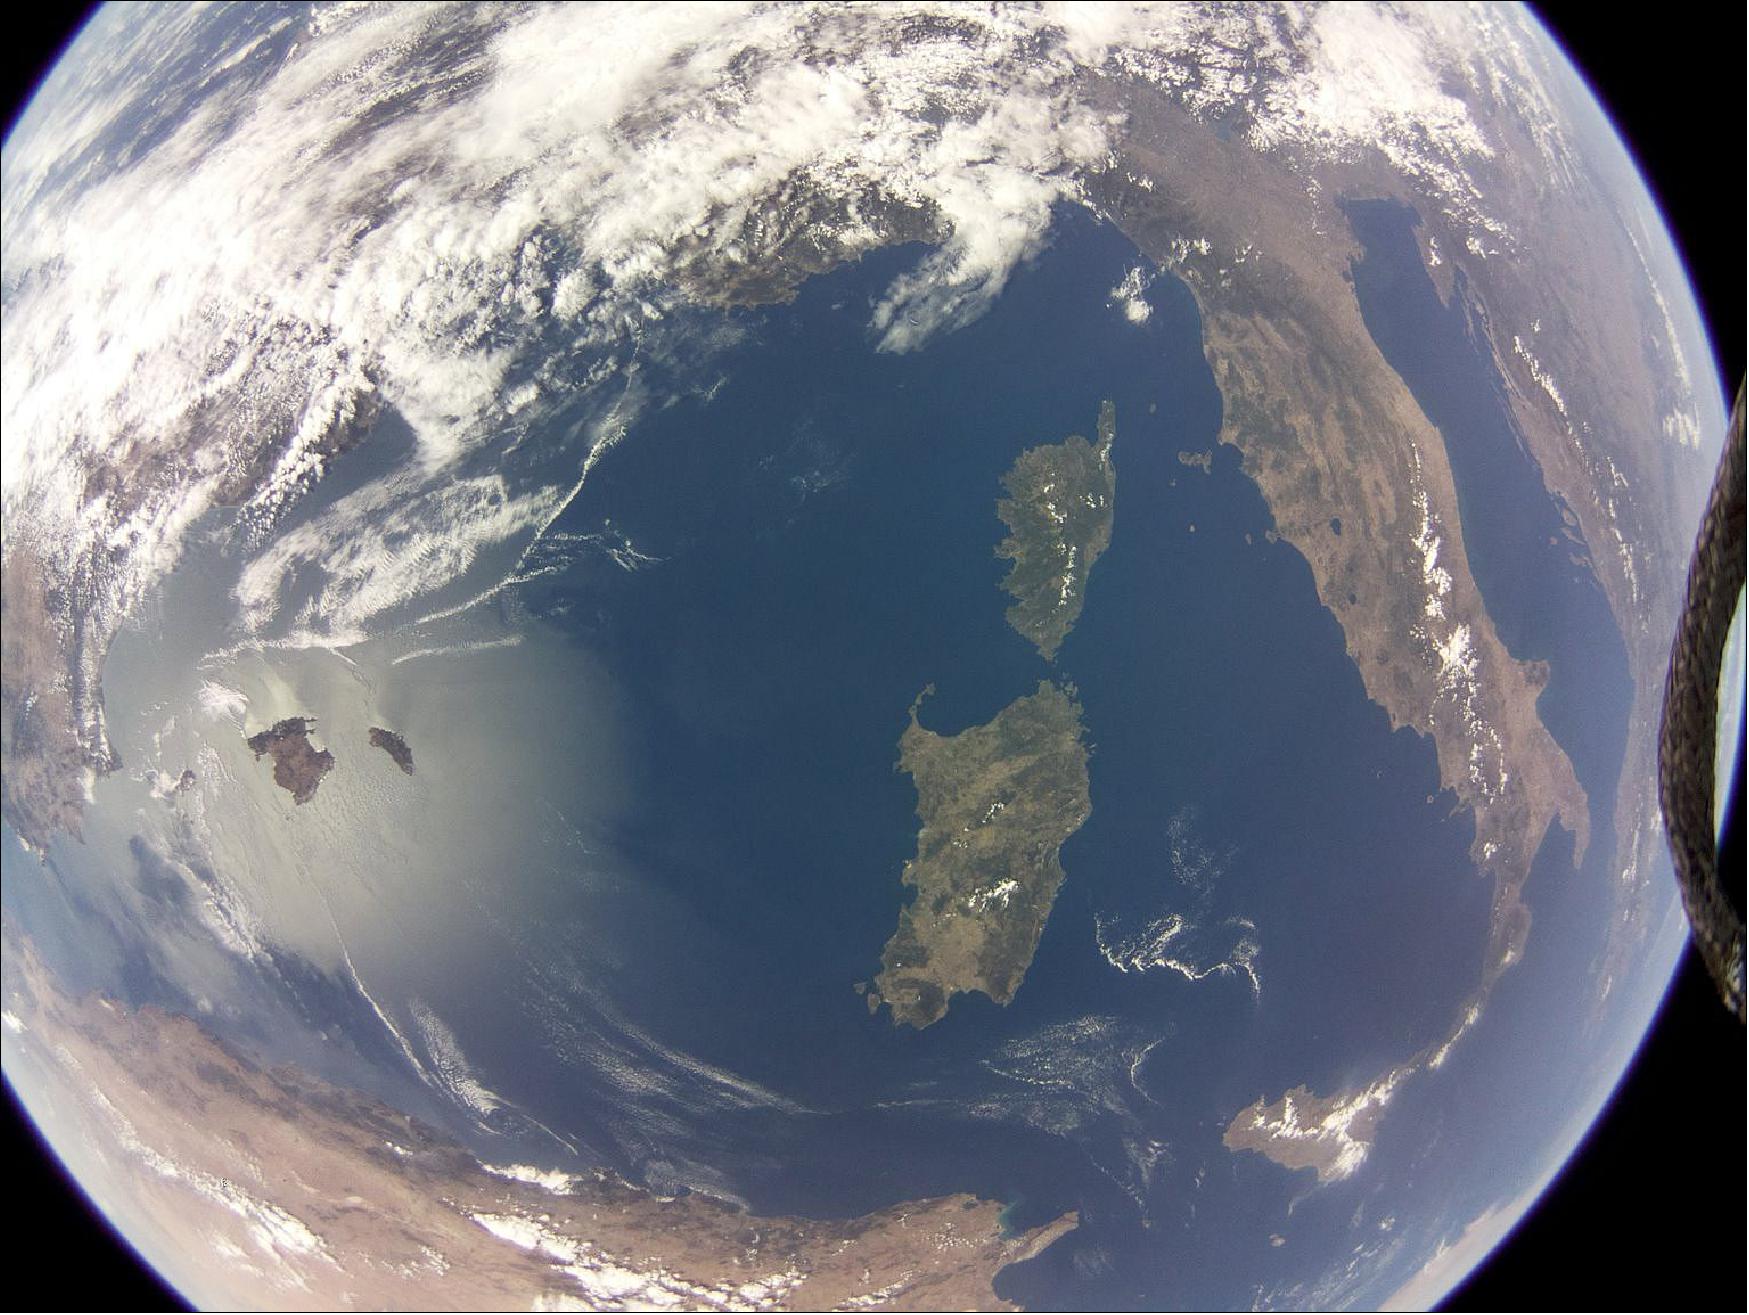 Figure 5: Image of the Mediterranean acquired by the commercial grade Raspberry Pi camera on board SSTL’s DoT-1 satellite on August 19, 2019 (image credit: SSTL) 4)